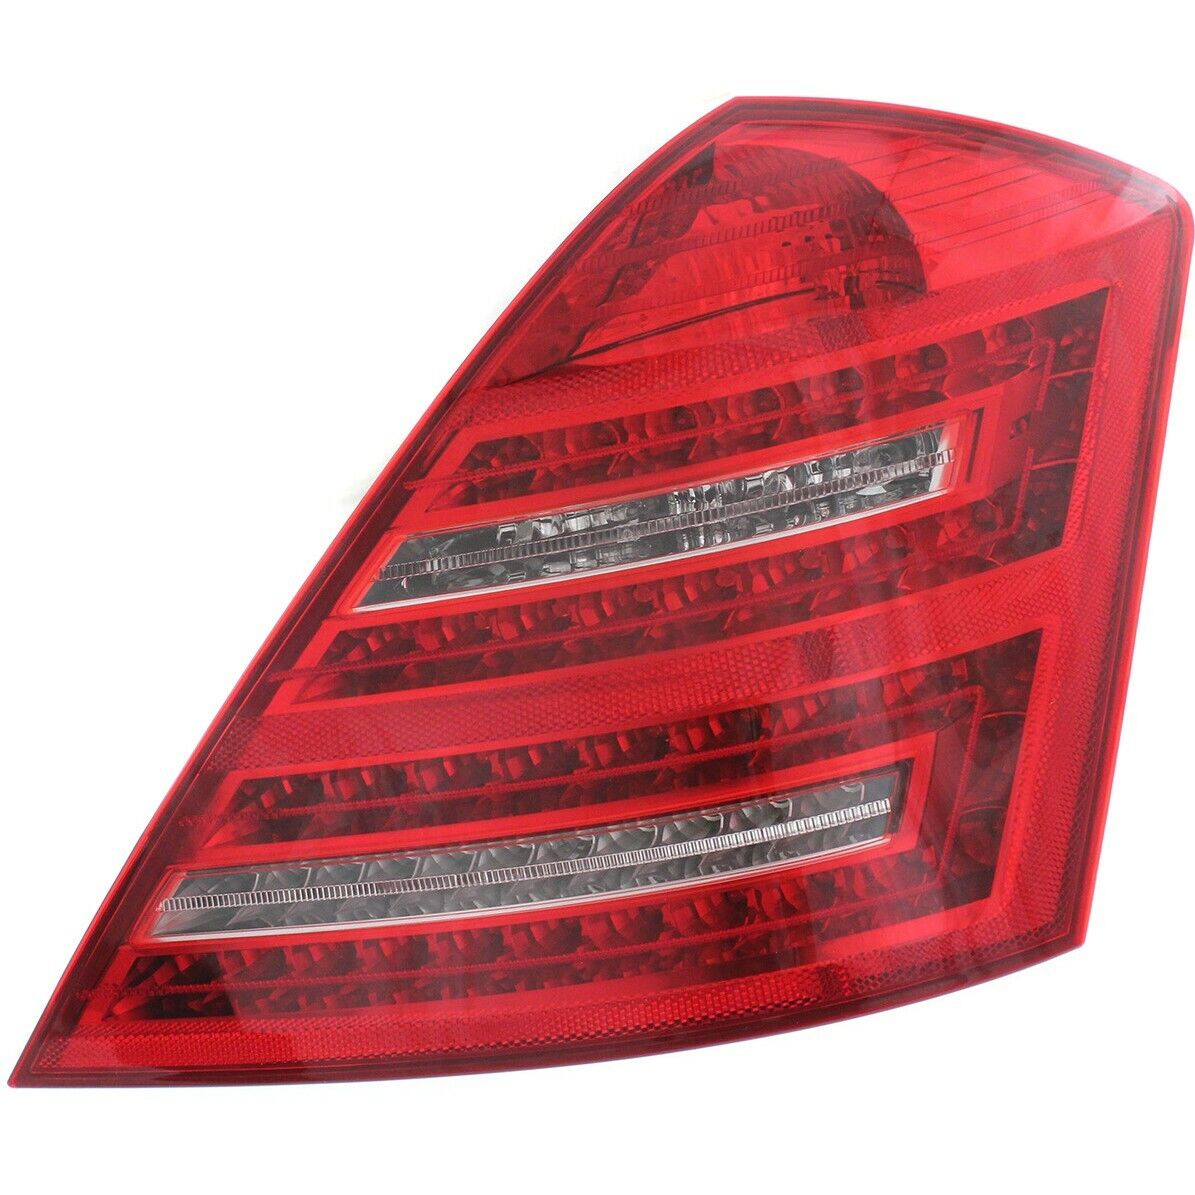 Taillight Taillamp Passenger Right RH for S350 S450 S550 S600 S63 AMG S65 AMG